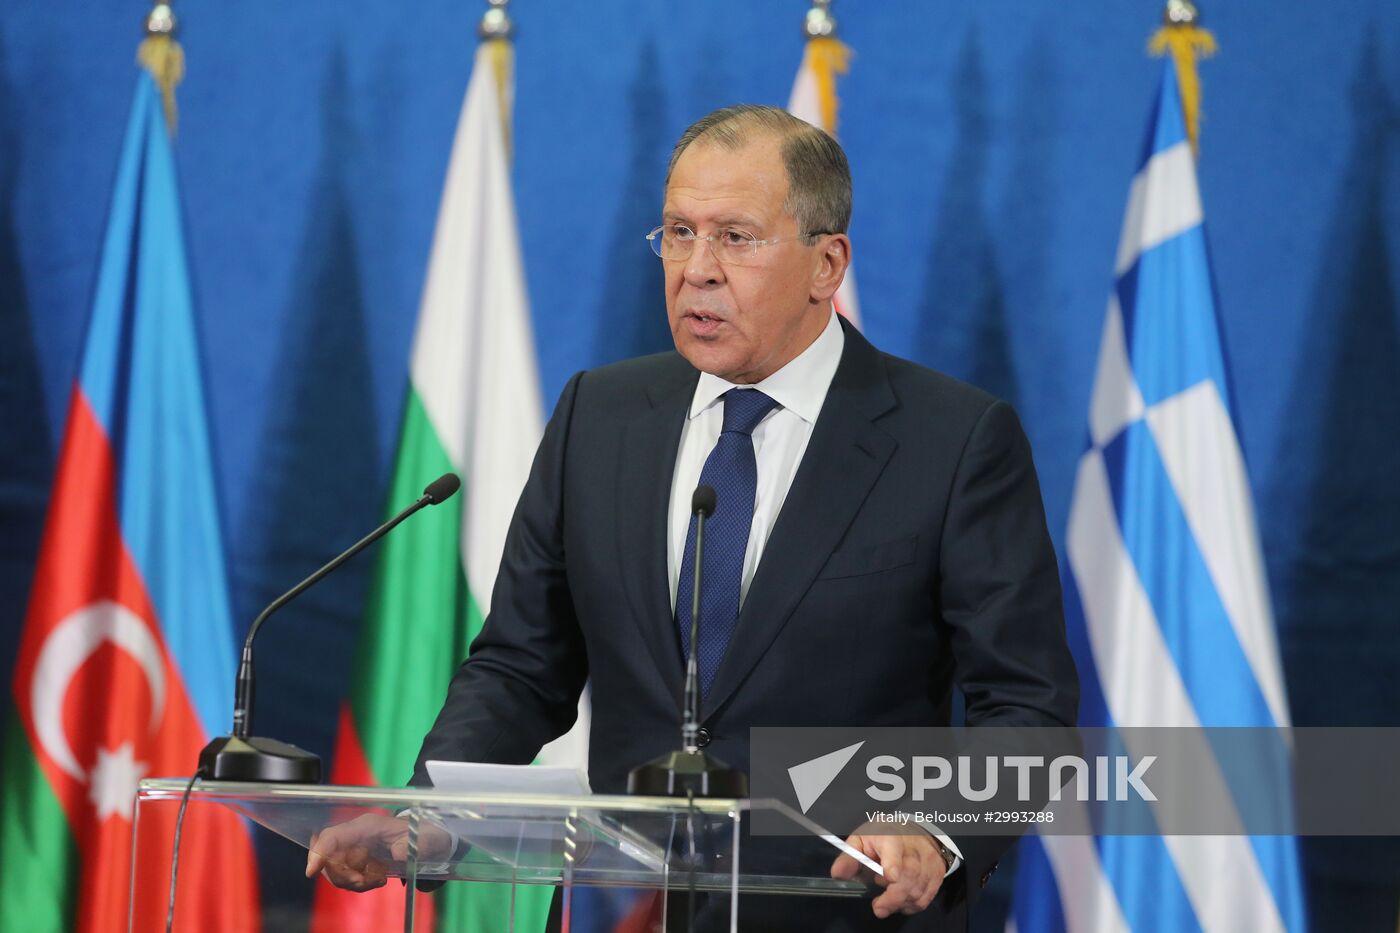 Foreign Minister Sergei Lavrov visits Serbia